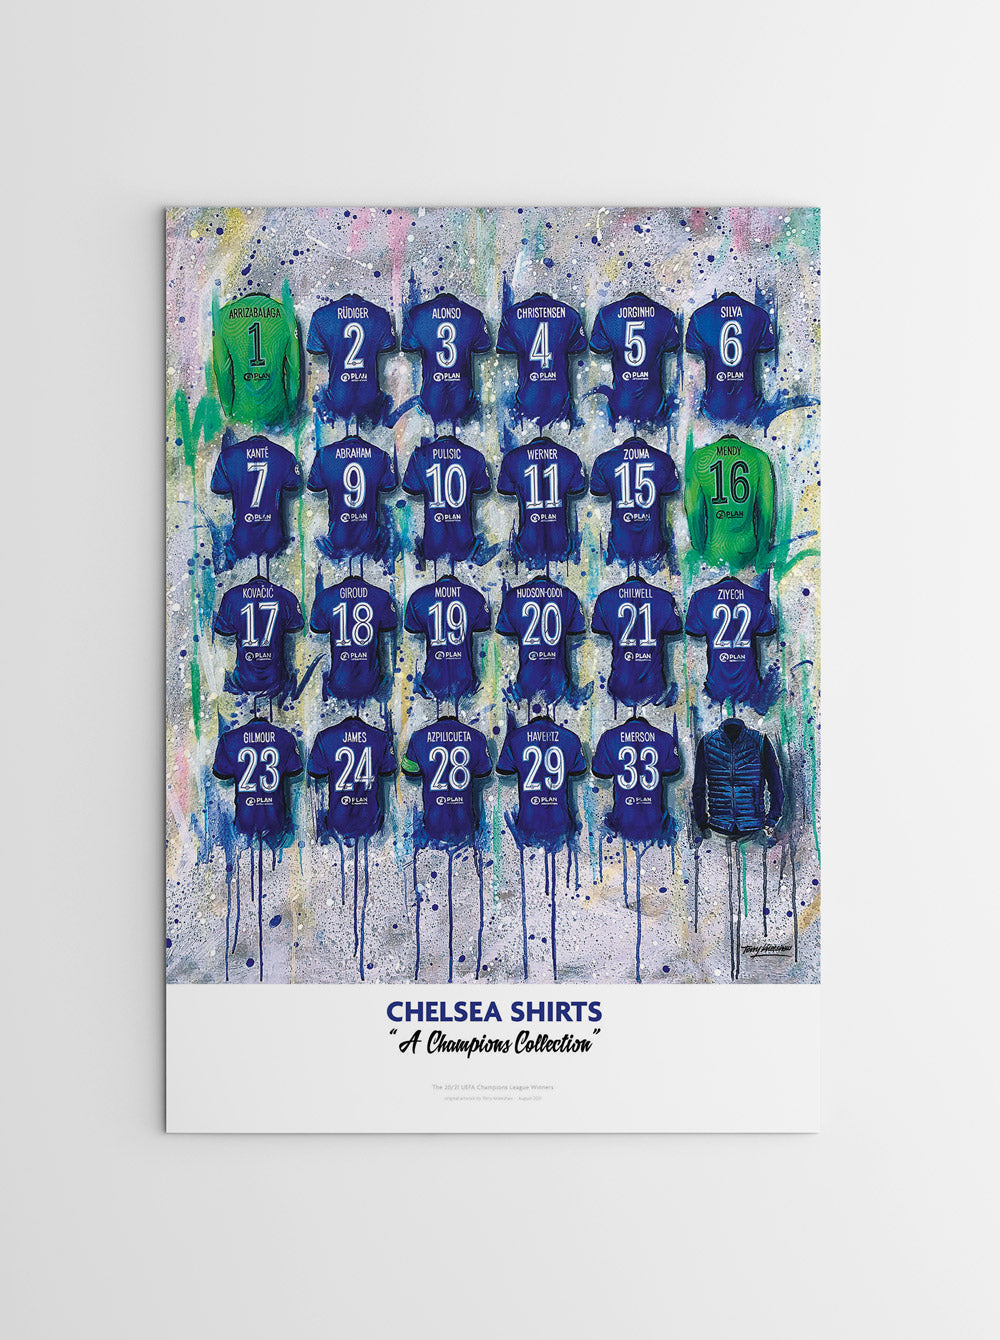 The Chelsea Champions personalised A2 limited edition print by Terry Kneeshaw features 16 iconic jerseys worn by the Blues players throughout their various championship-winning campaigns. This stunning artwork celebrates Chelsea's triumphs and achievements, showcasing the team's success through the years. The print is customisable with the option to include a name or message, making it a unique and special gift for any Chelsea fan or football enthusiast.